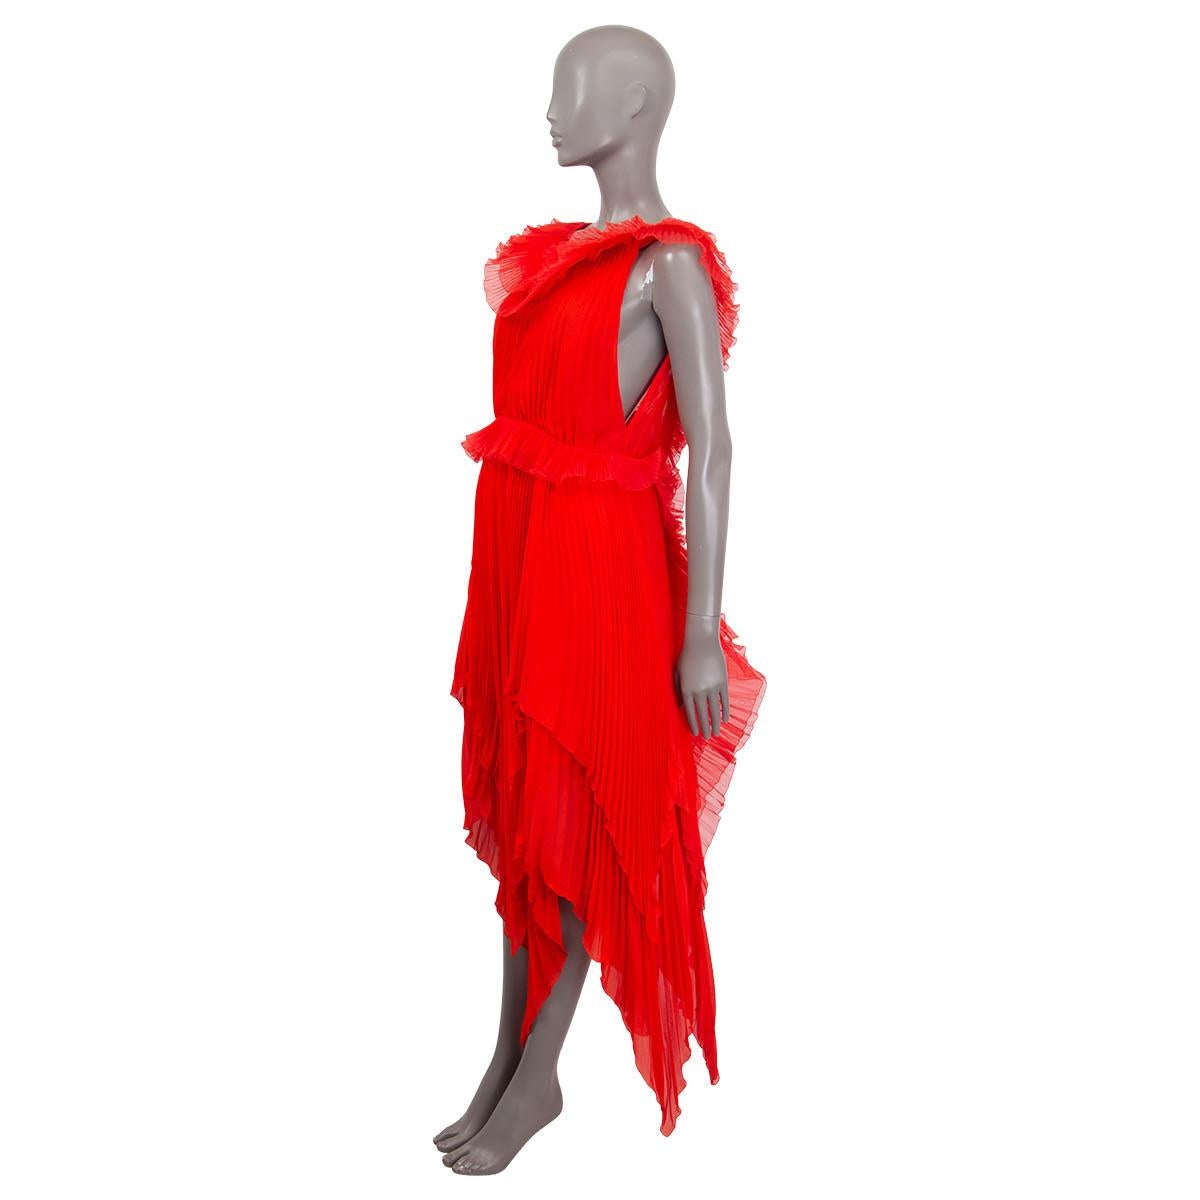 100% authentic Givenchy Spring/Summer 2018 pleated dress in cherry red silk-georgette (100%). Features ruffled details, a asymmetrical hemline and a deep v-shaped back. Opens with a concealed zipper and a hook at the back. Lined in cherry red silk